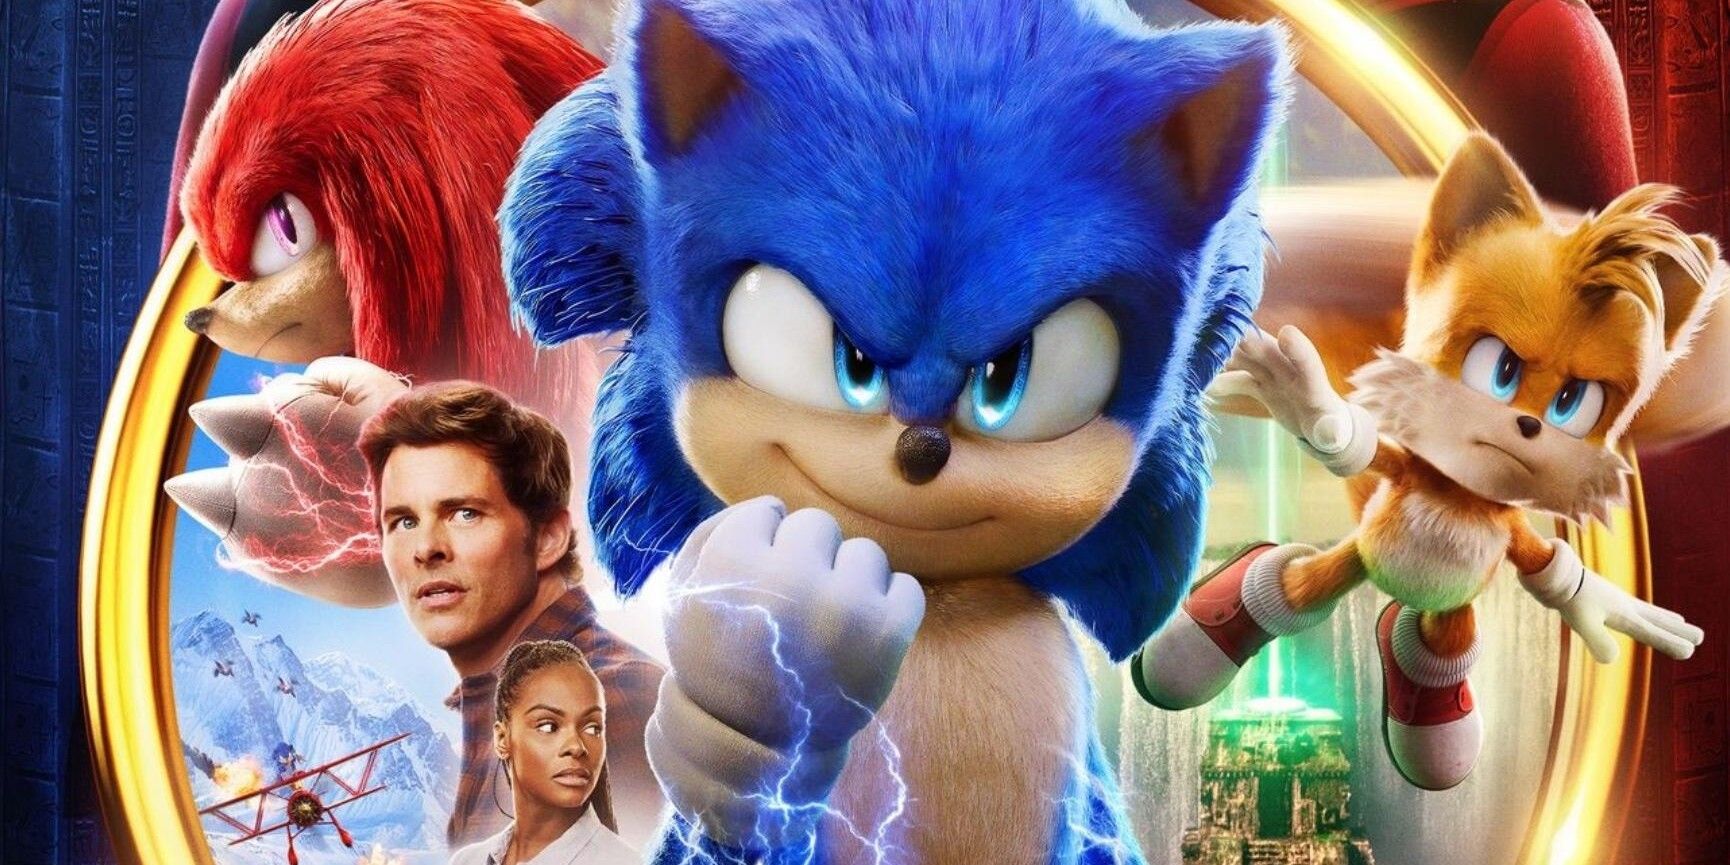 Sonic the Hedgehog 2 poster cast